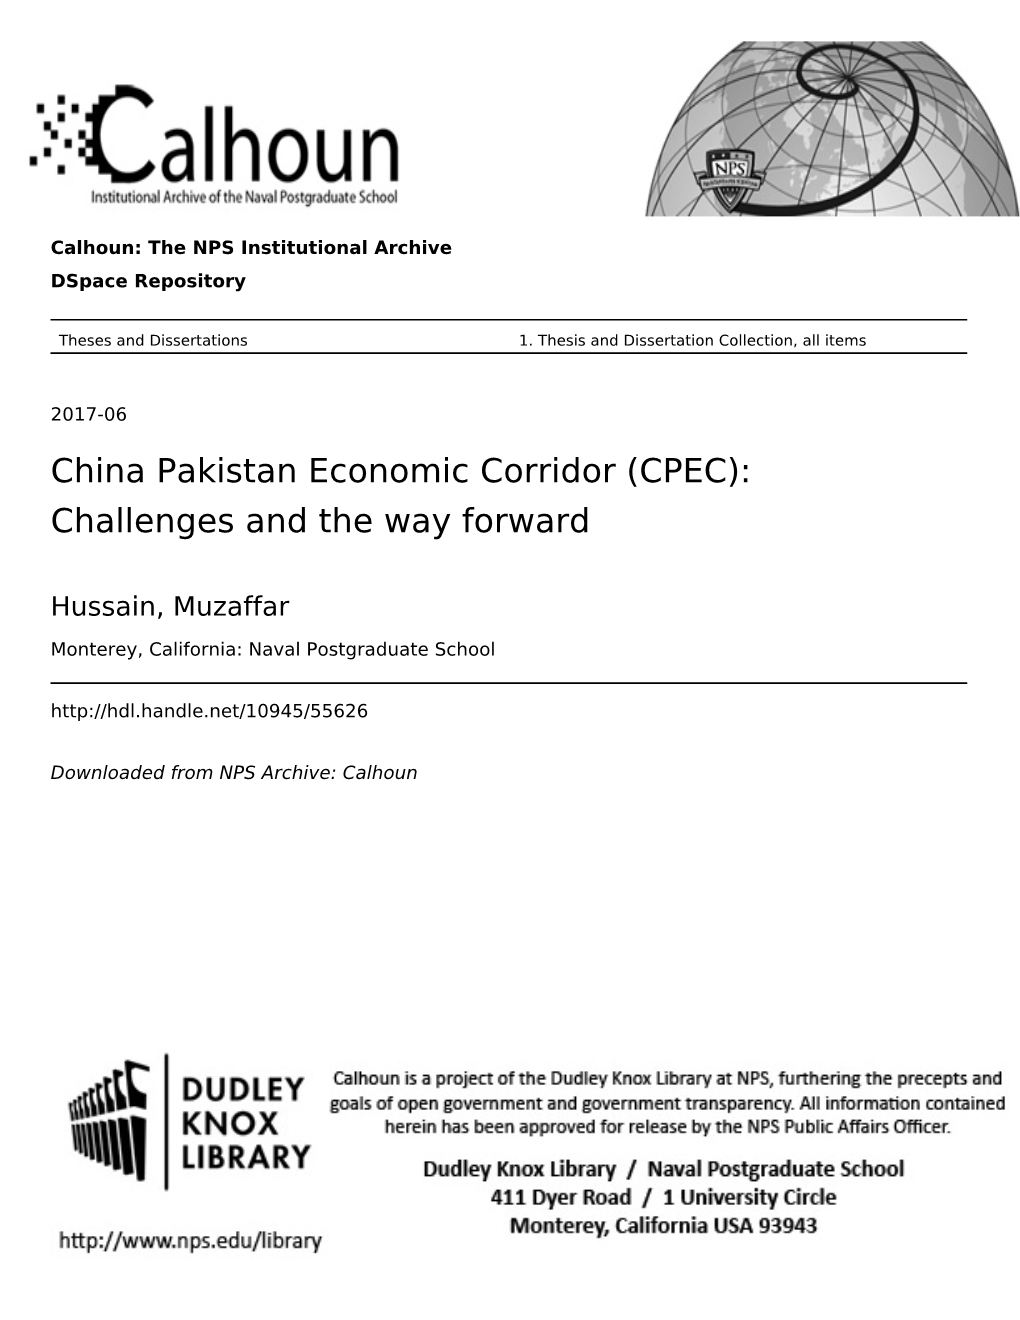 China Pakistan Economic Corridor (CPEC): Challenges and the Way Forward